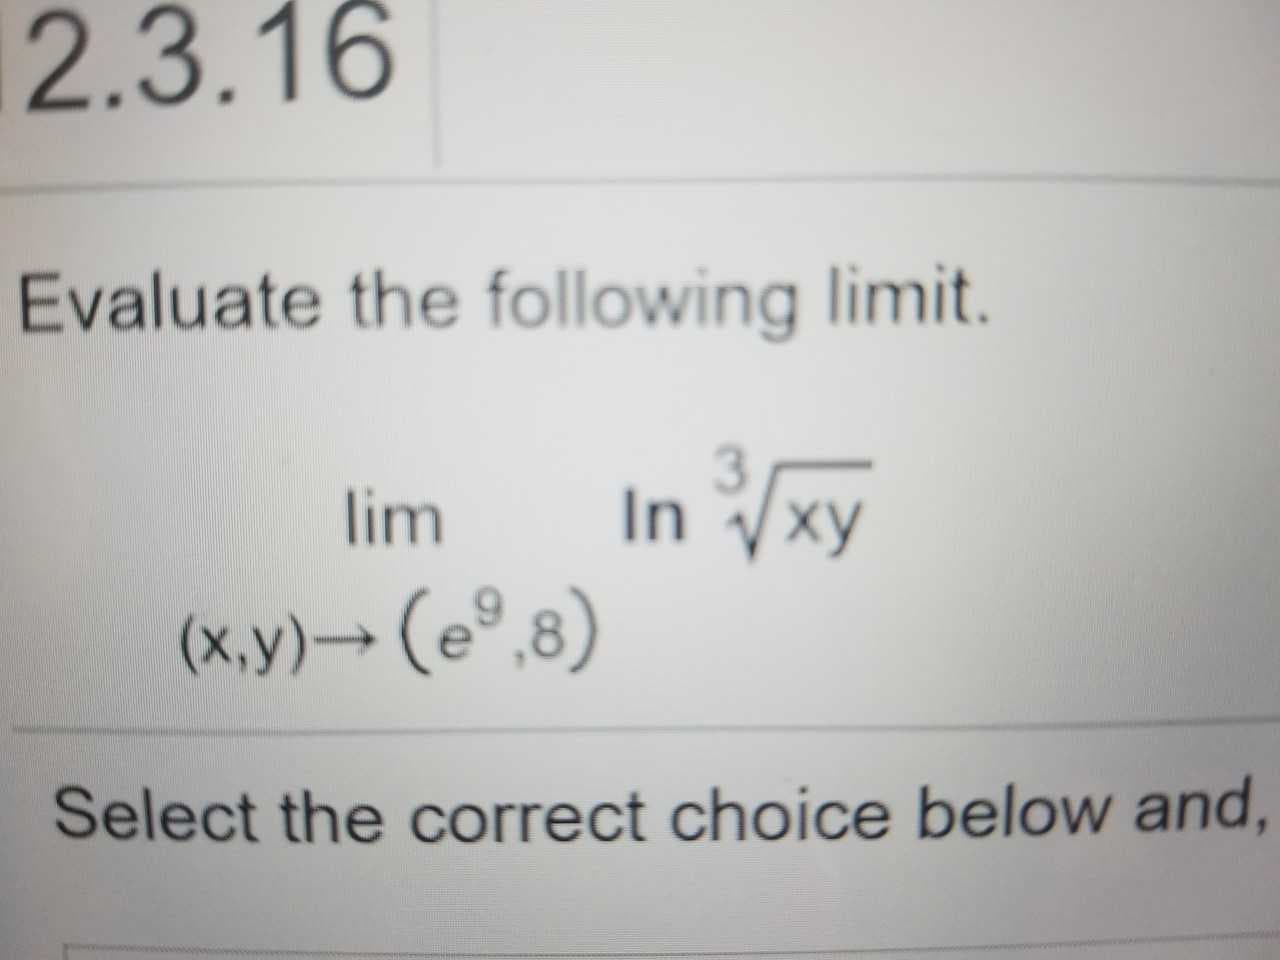 2.3.16
Evaluate the following limit.
li In Vxy
(x.y)- (e9.8)
Select the correct choice below and
